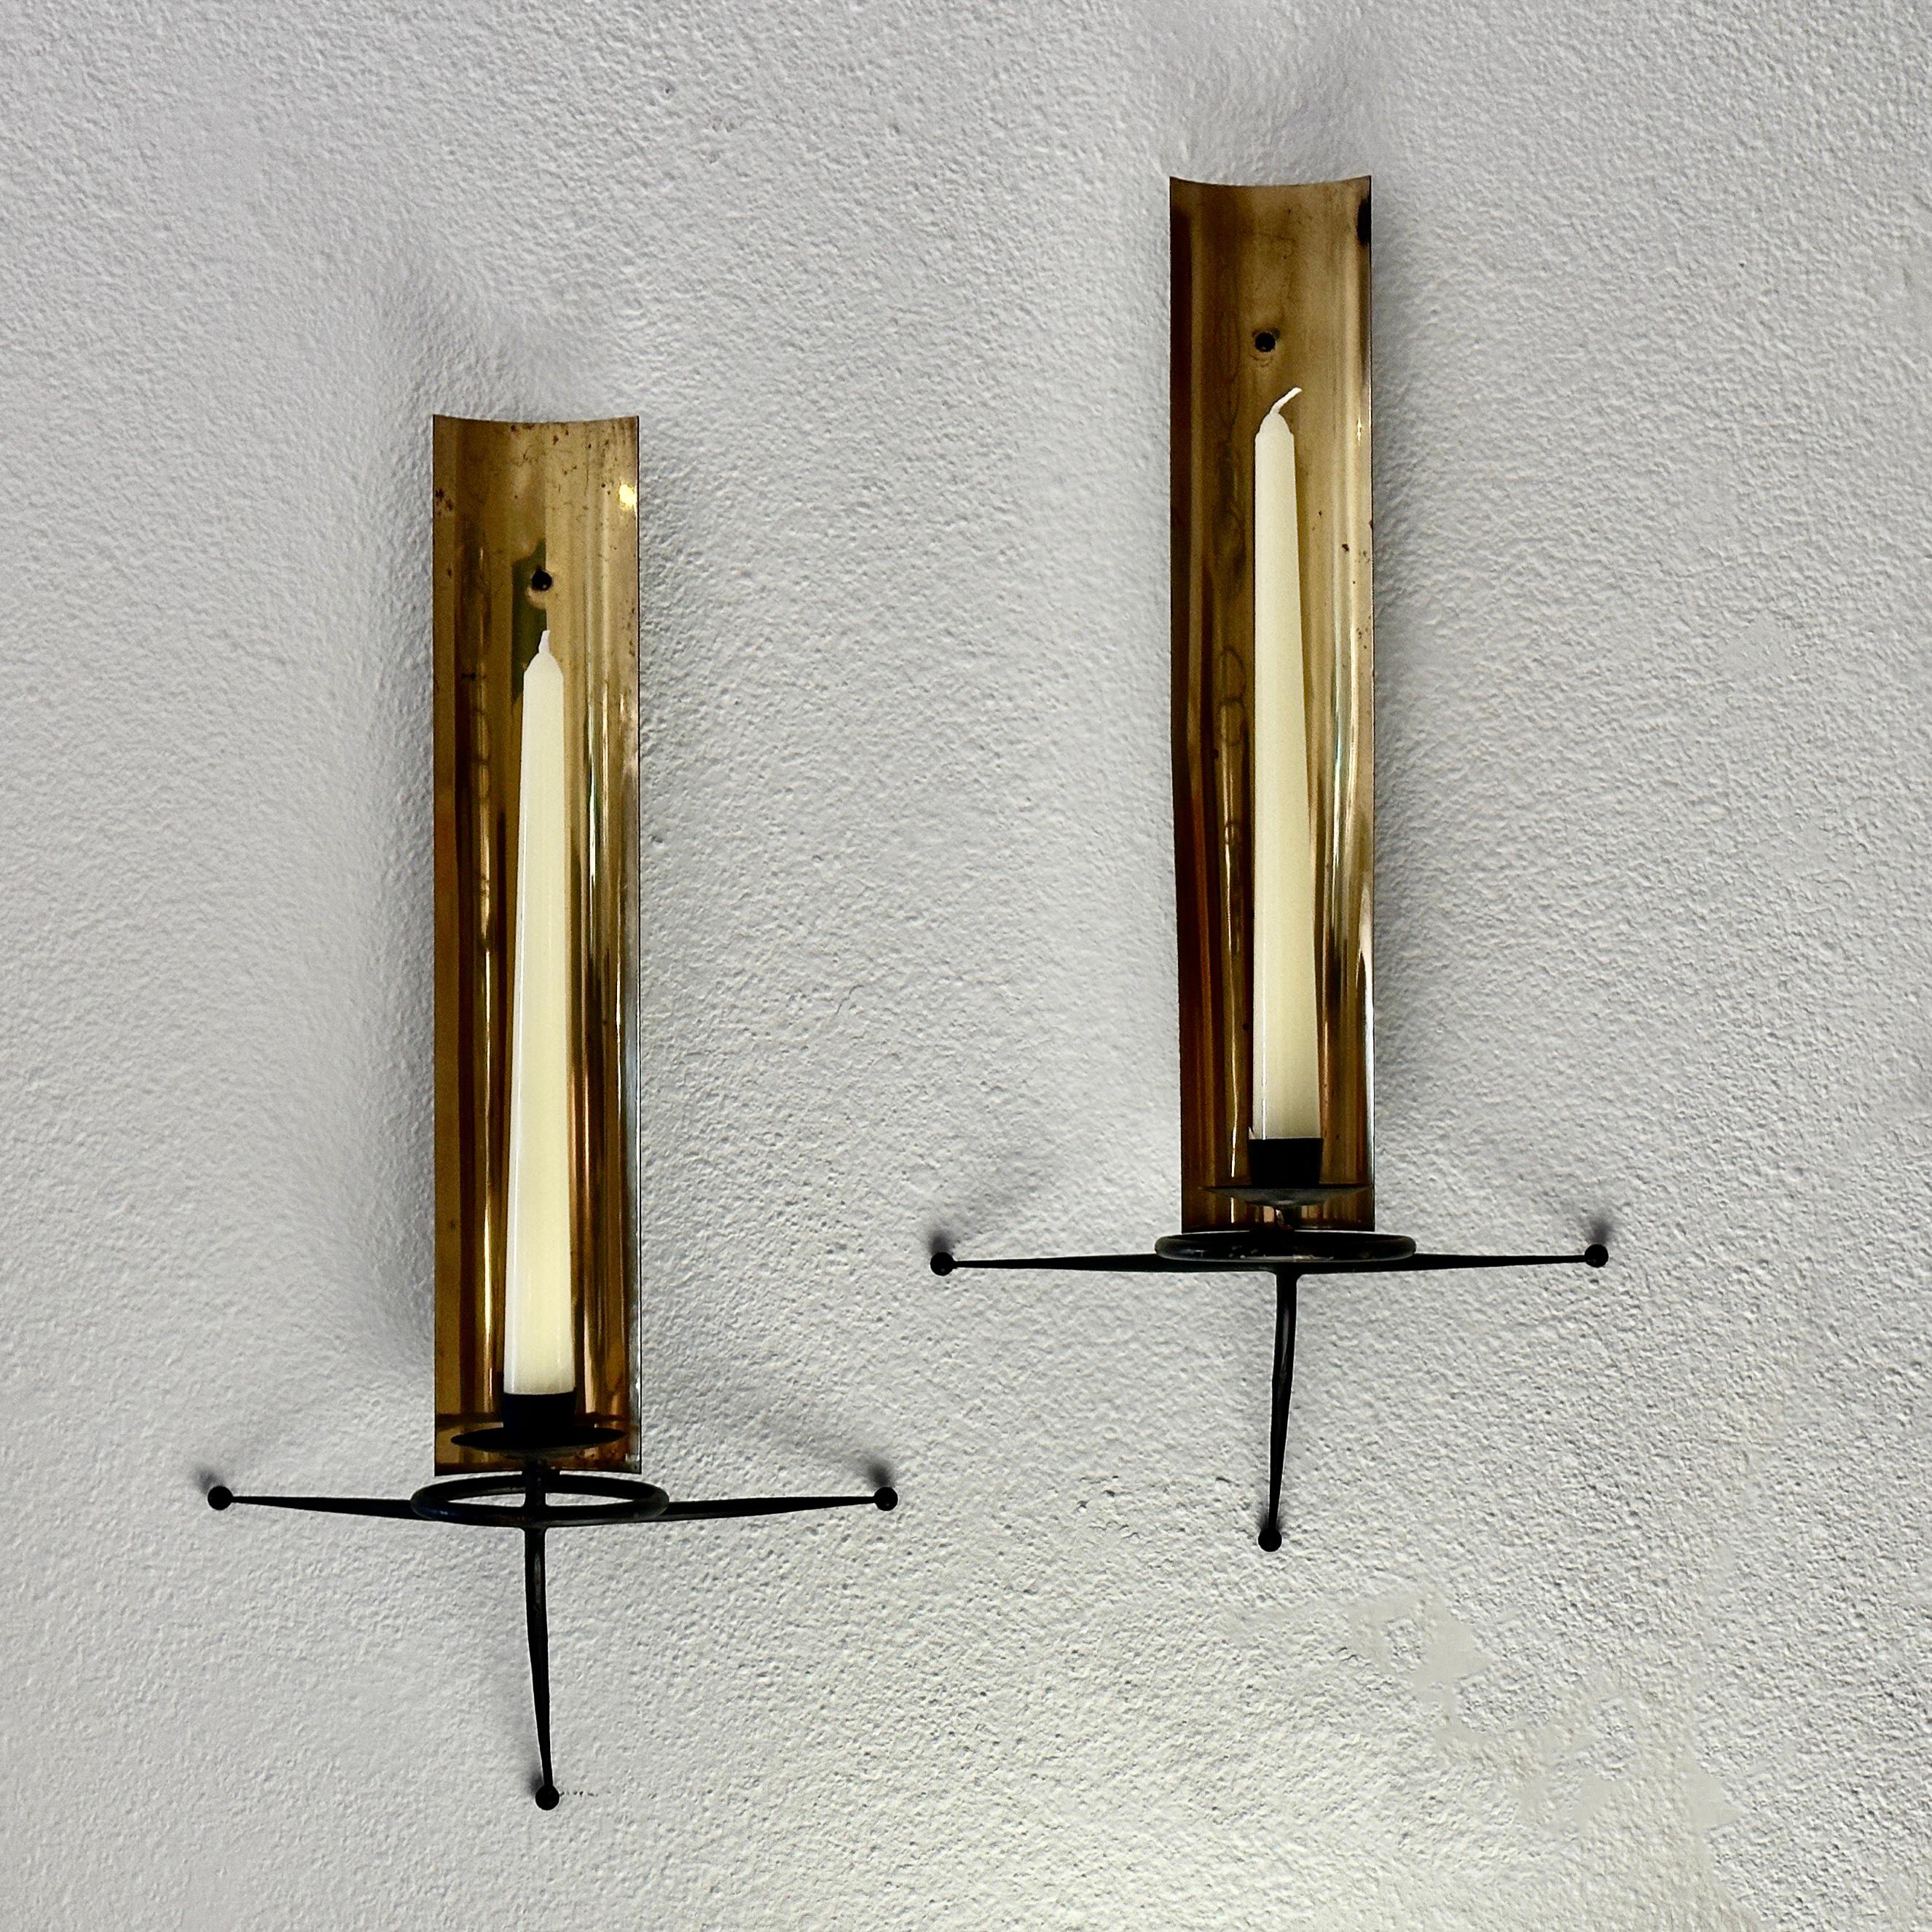 Unusual Pair of Brass and Iron Atomic Style Candle Sconces designed by Tony Paul in the 1950s.

Rare to find the pair with none of the ball wall rests damaged or missing. There is some tarnish to the brass as you can see in the detailed photos as